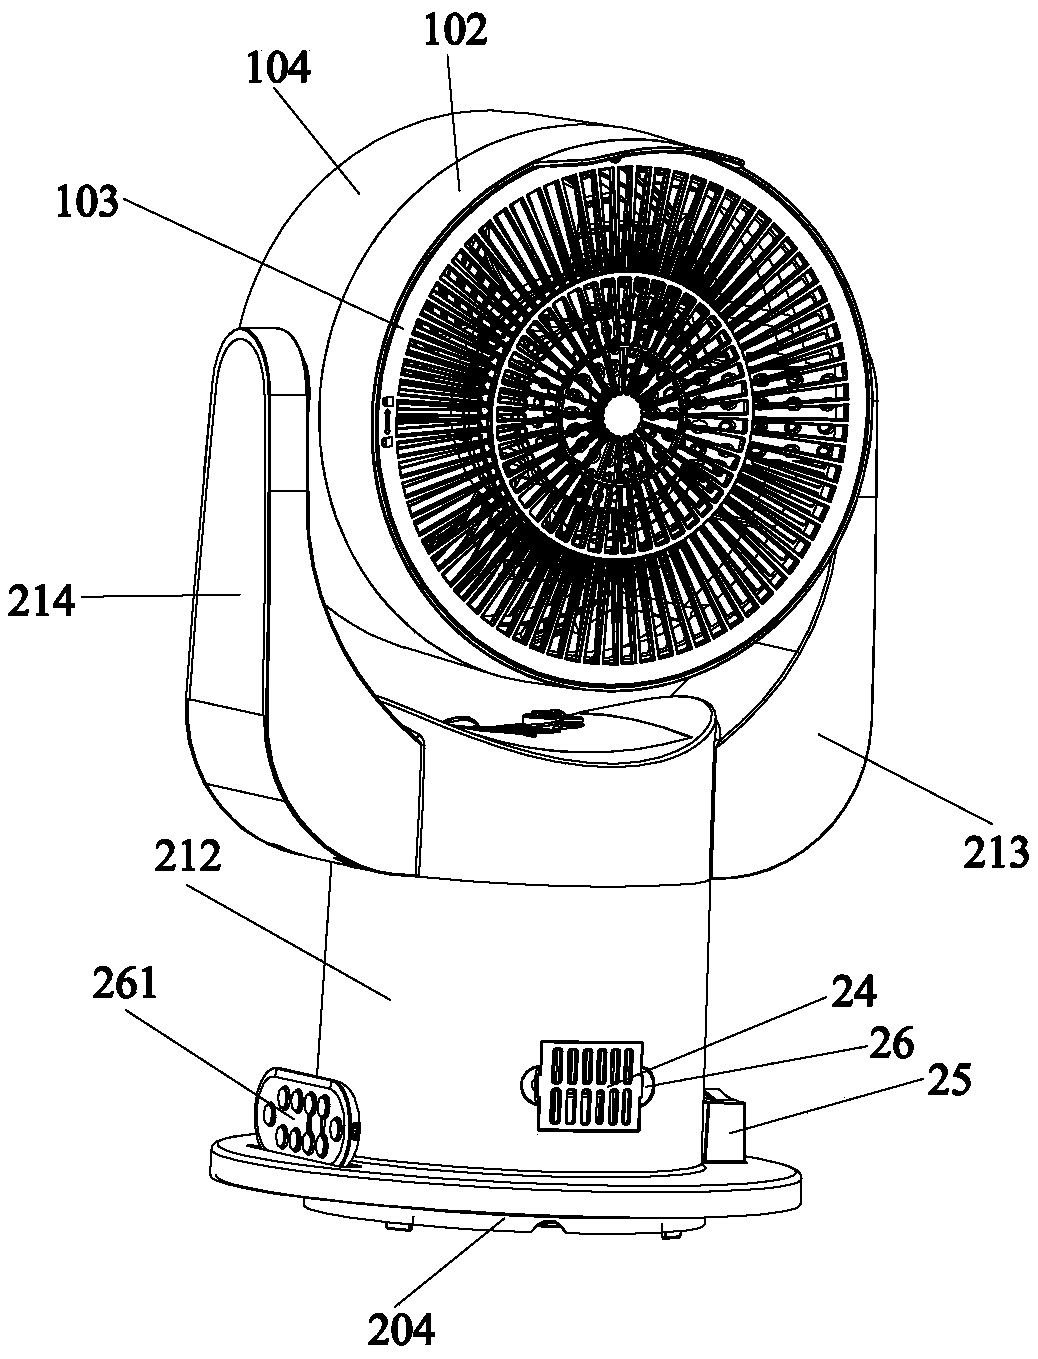 Circulating fan with humidifying and heating functions